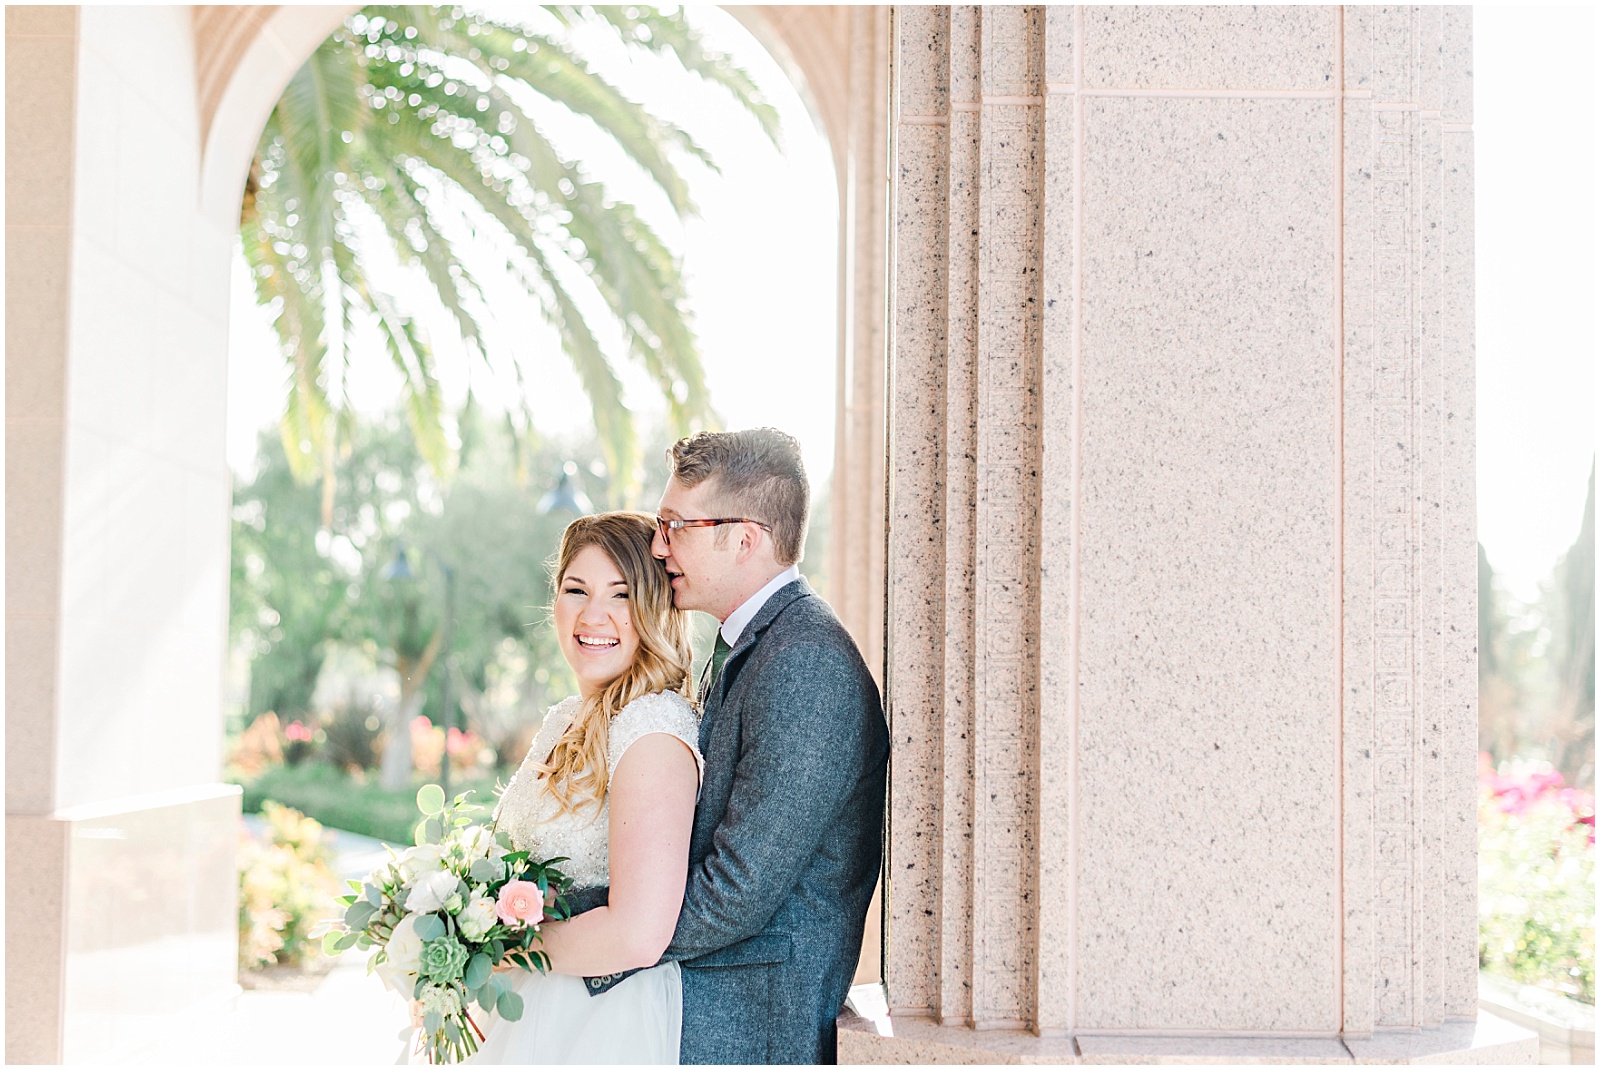 Newport Beach Temple Wedding by Mollie Jane Photography.  To see more go to www.molliejanephotography.com